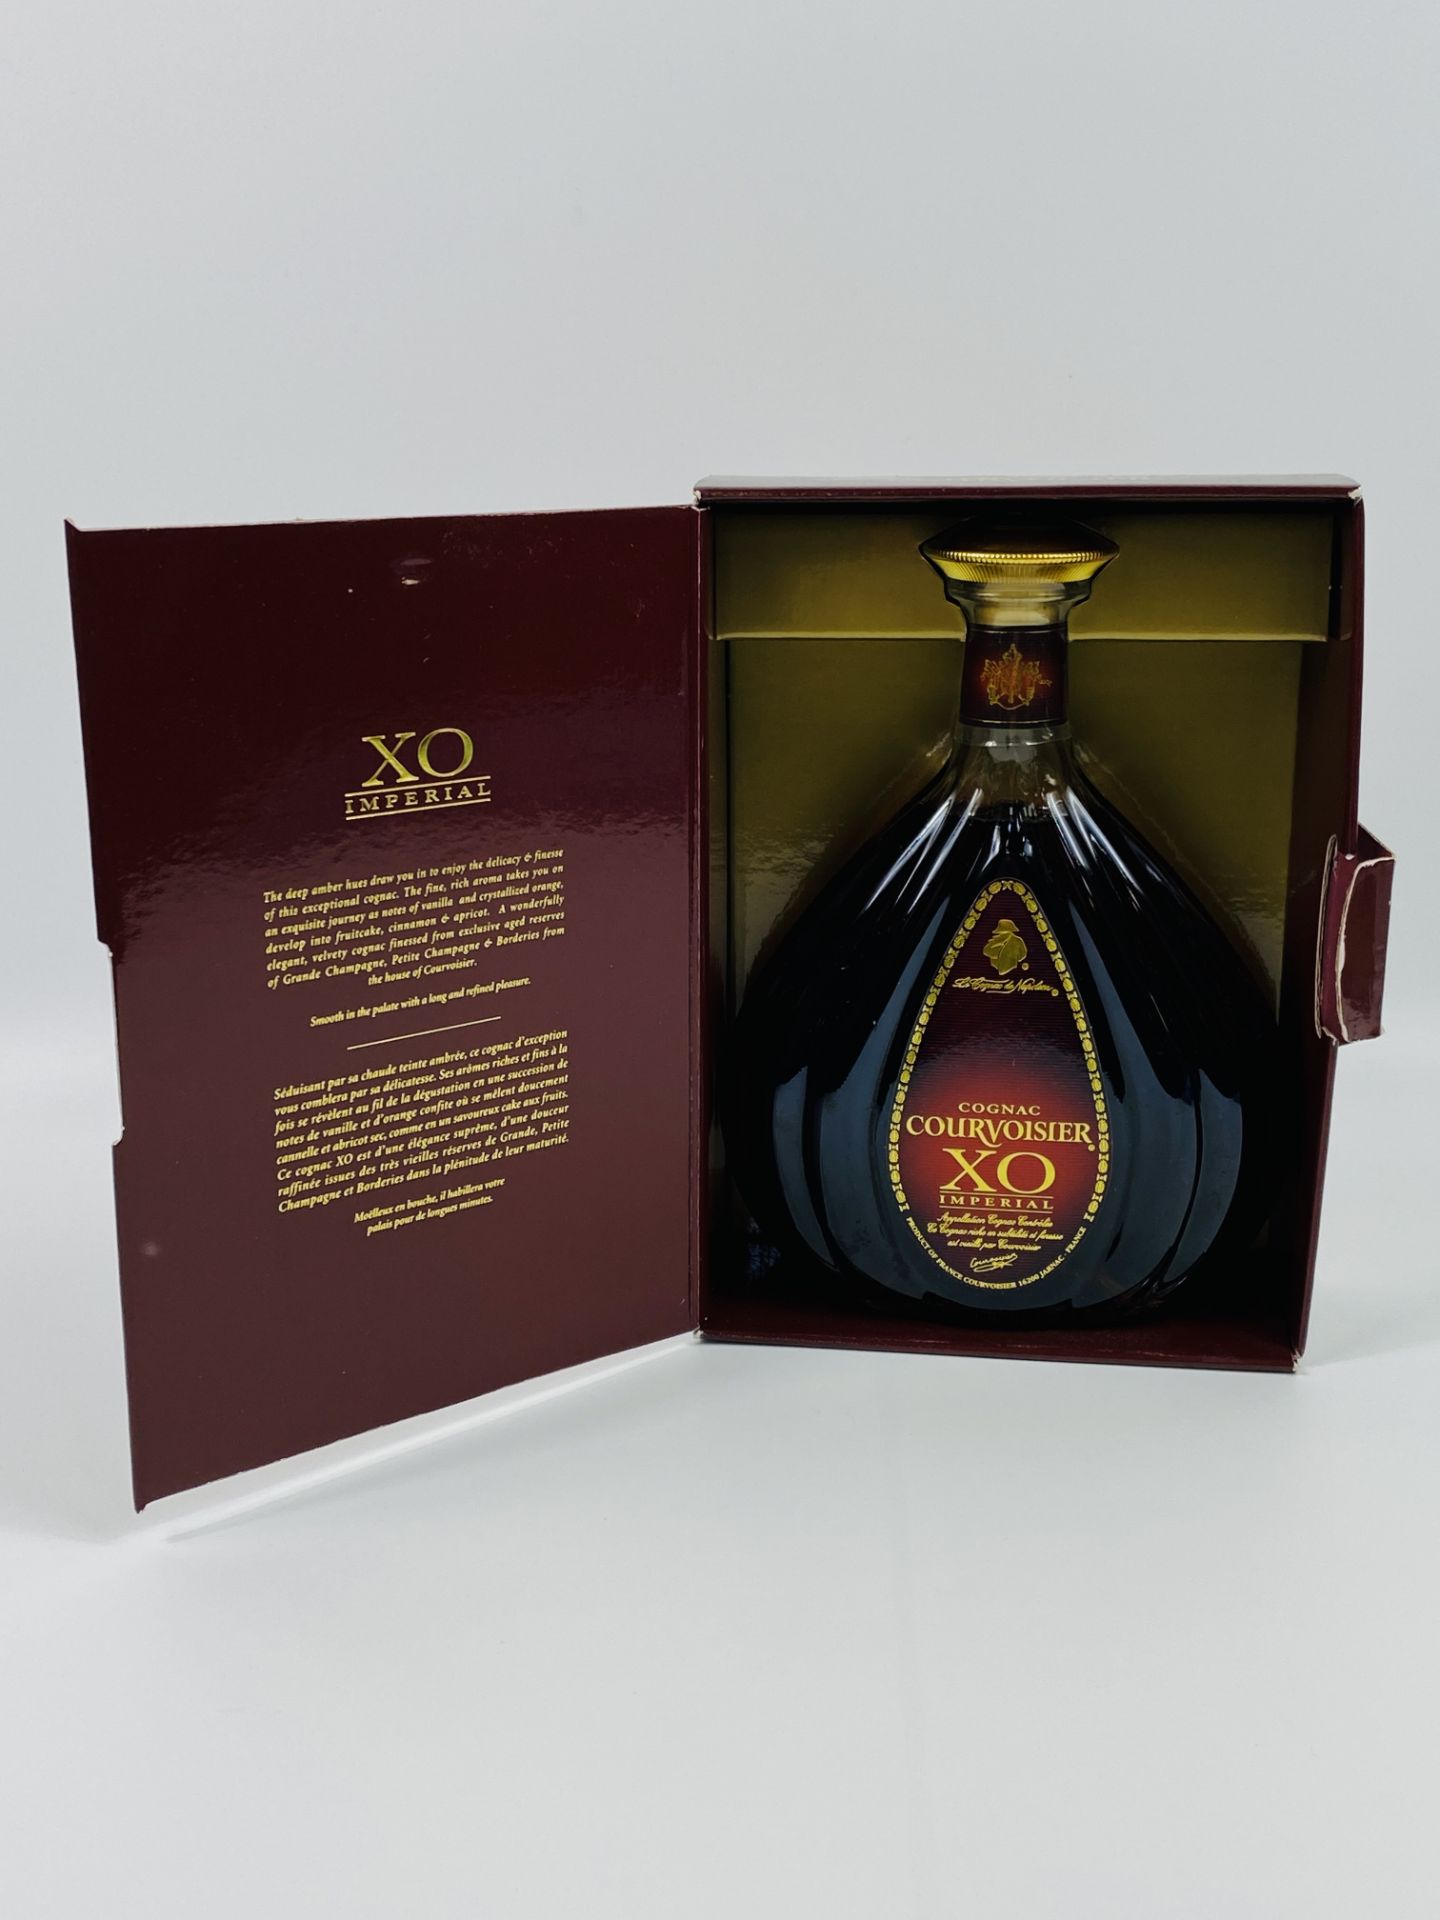 70cl bottle of Cognac Courvoisier XO Imperial in presentation box - Image 4 of 4